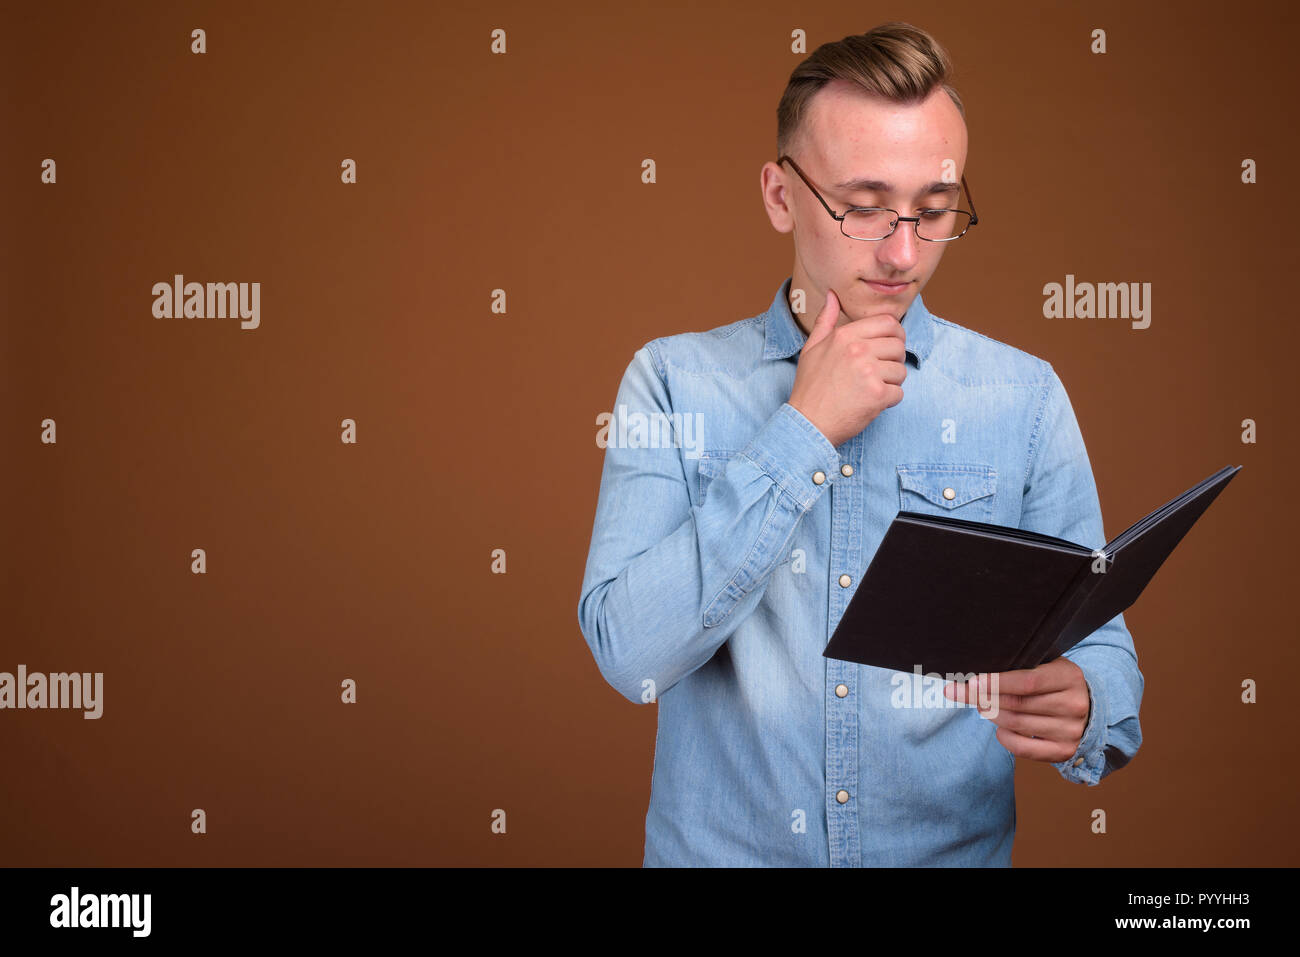 Portrait of young student man reading book and thinking Stock Photo